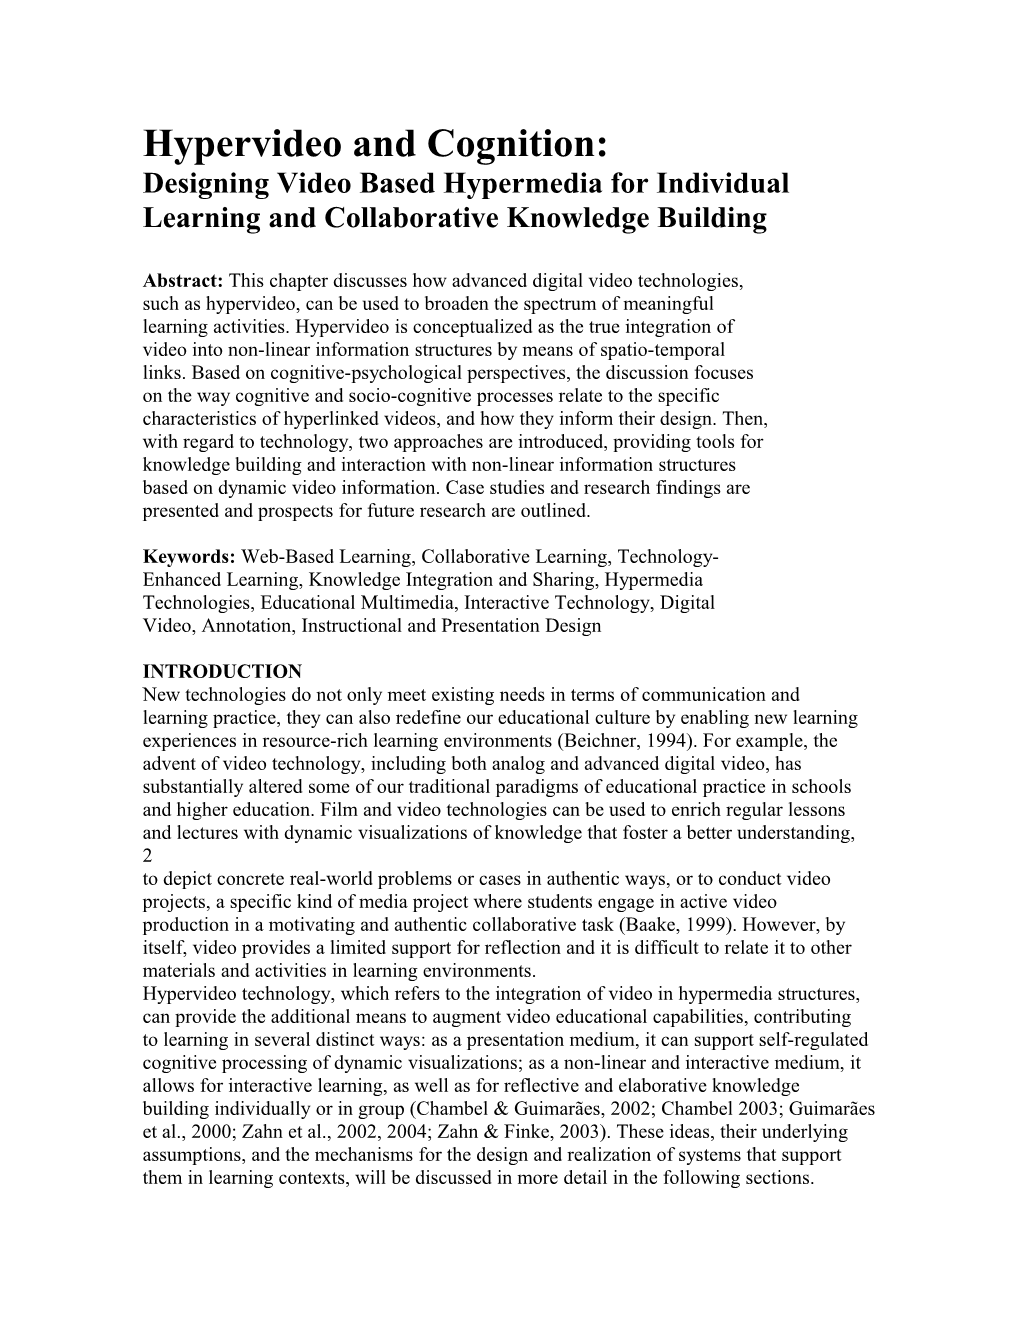 Designing Video Based Hypermedia for Individual